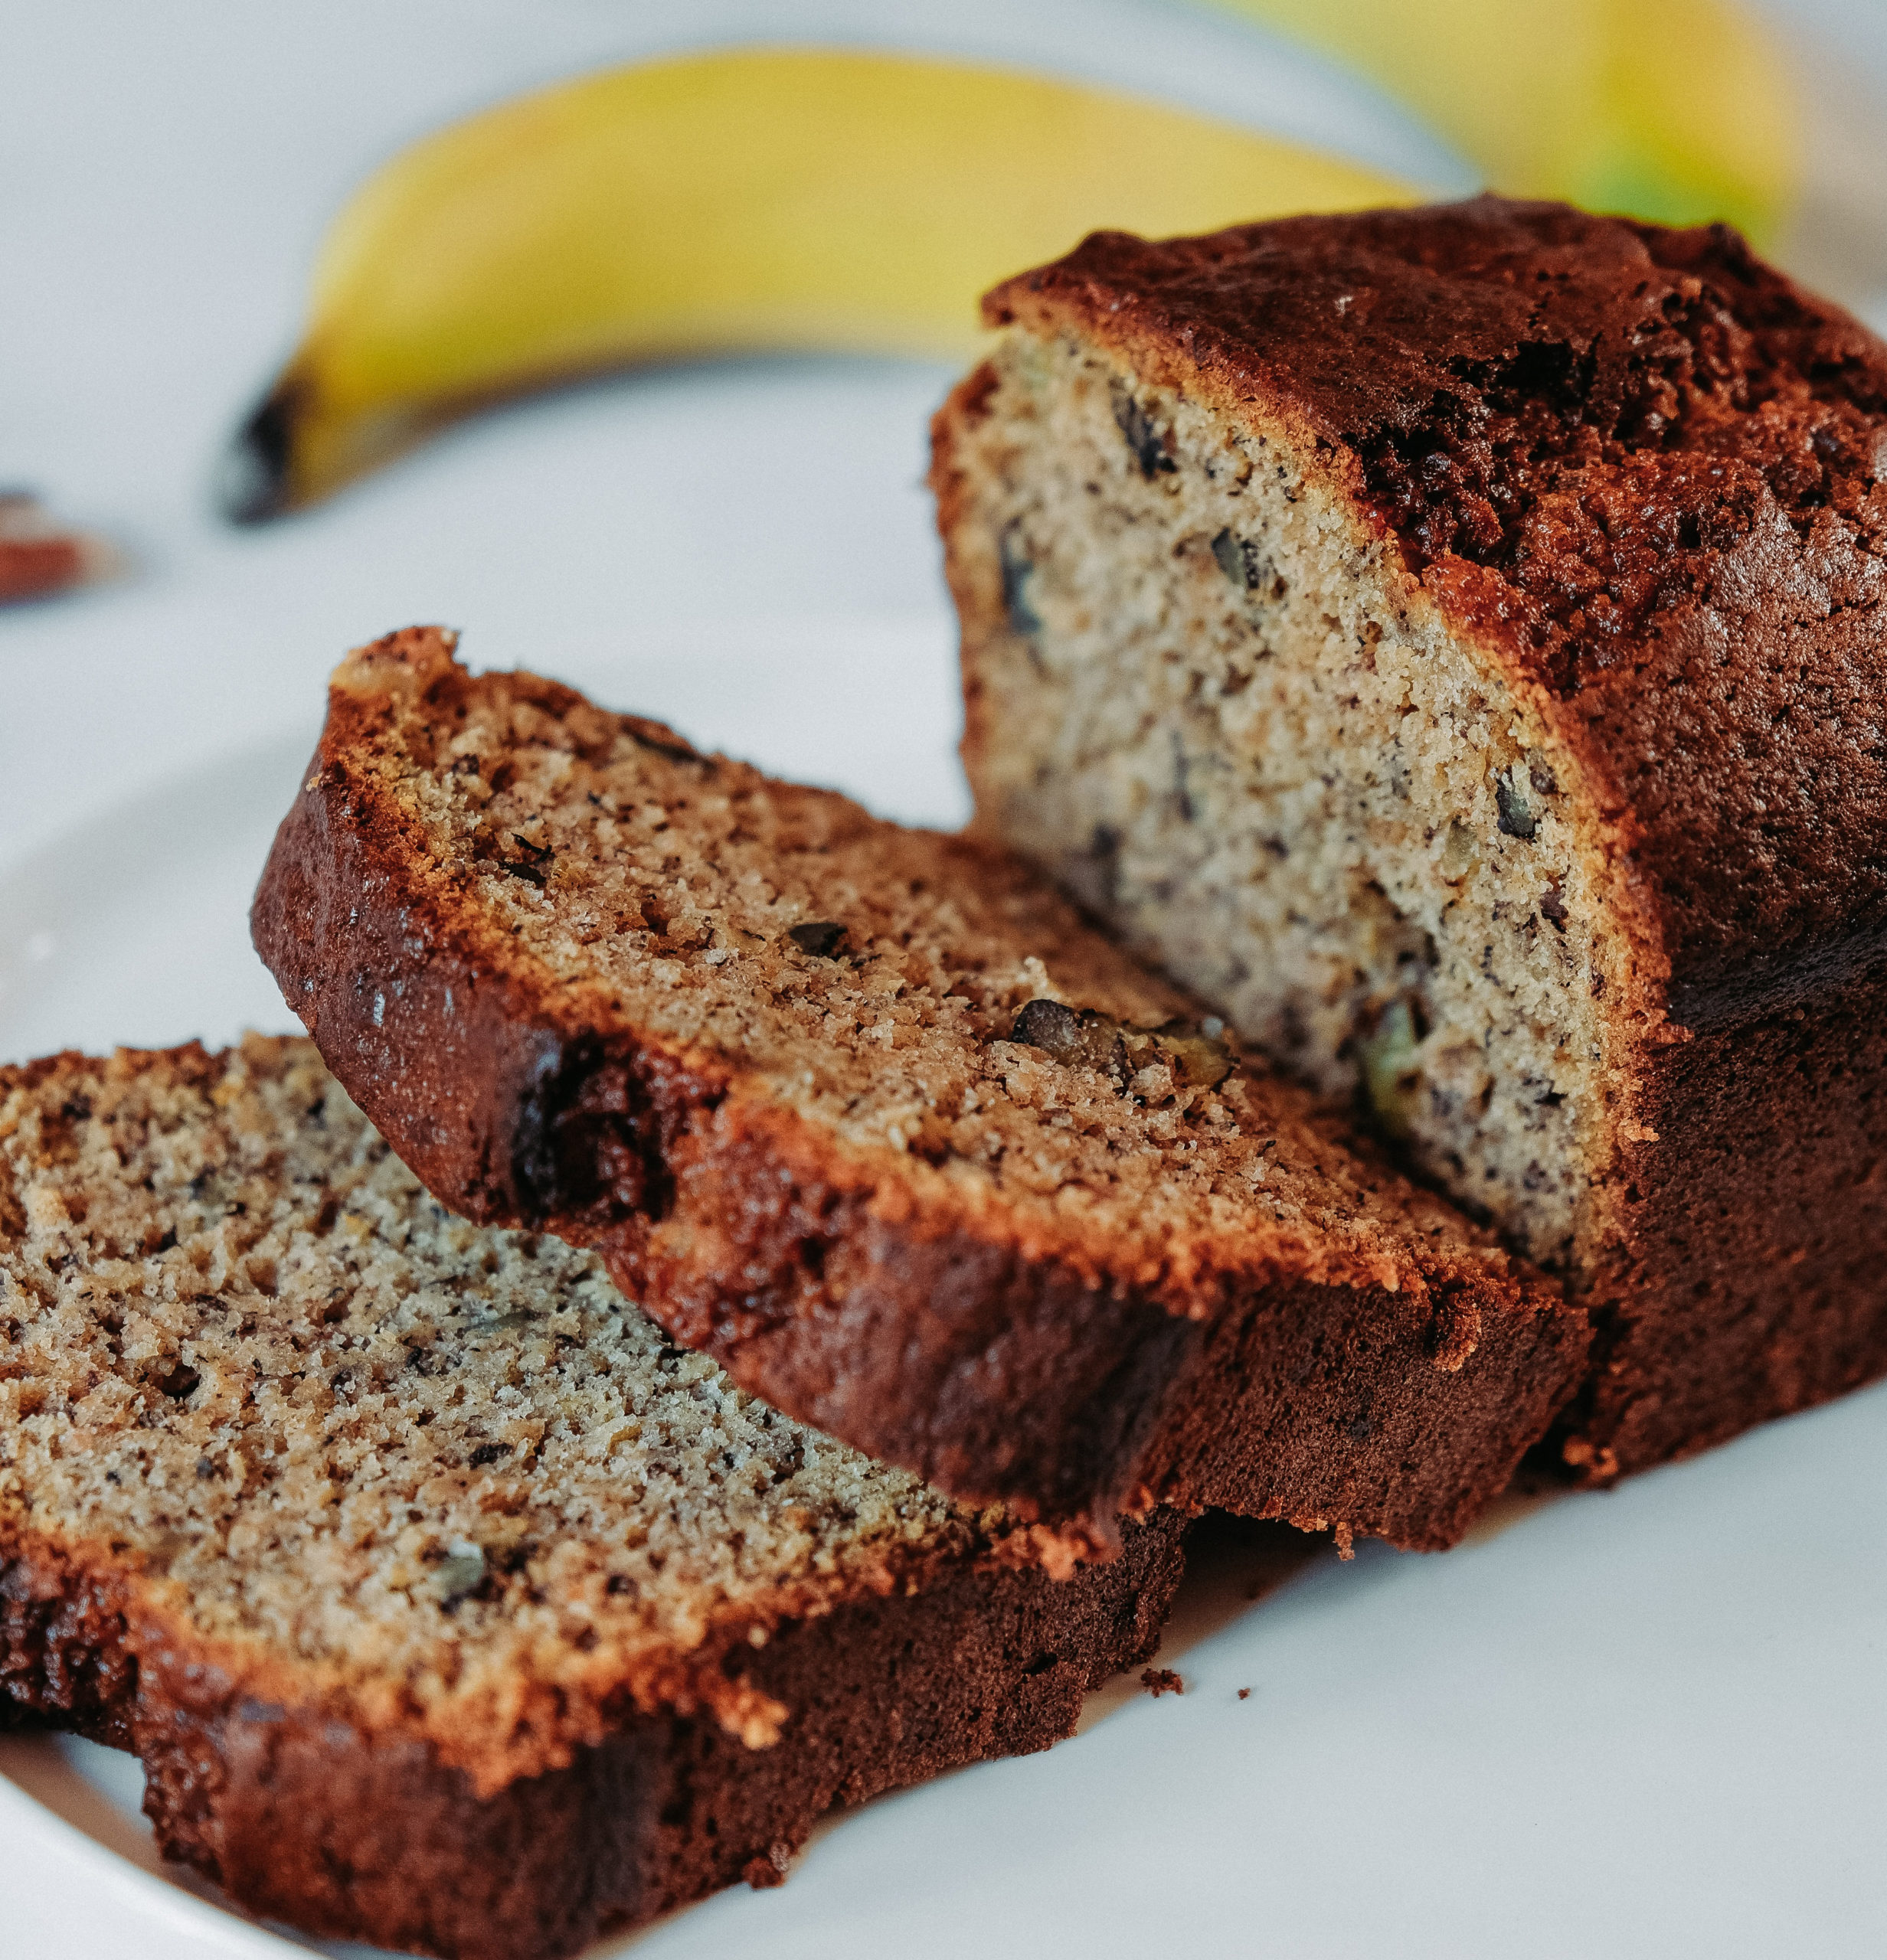 In Honor of National Banana Bread Day (yes, this is a thing), Feb. 23